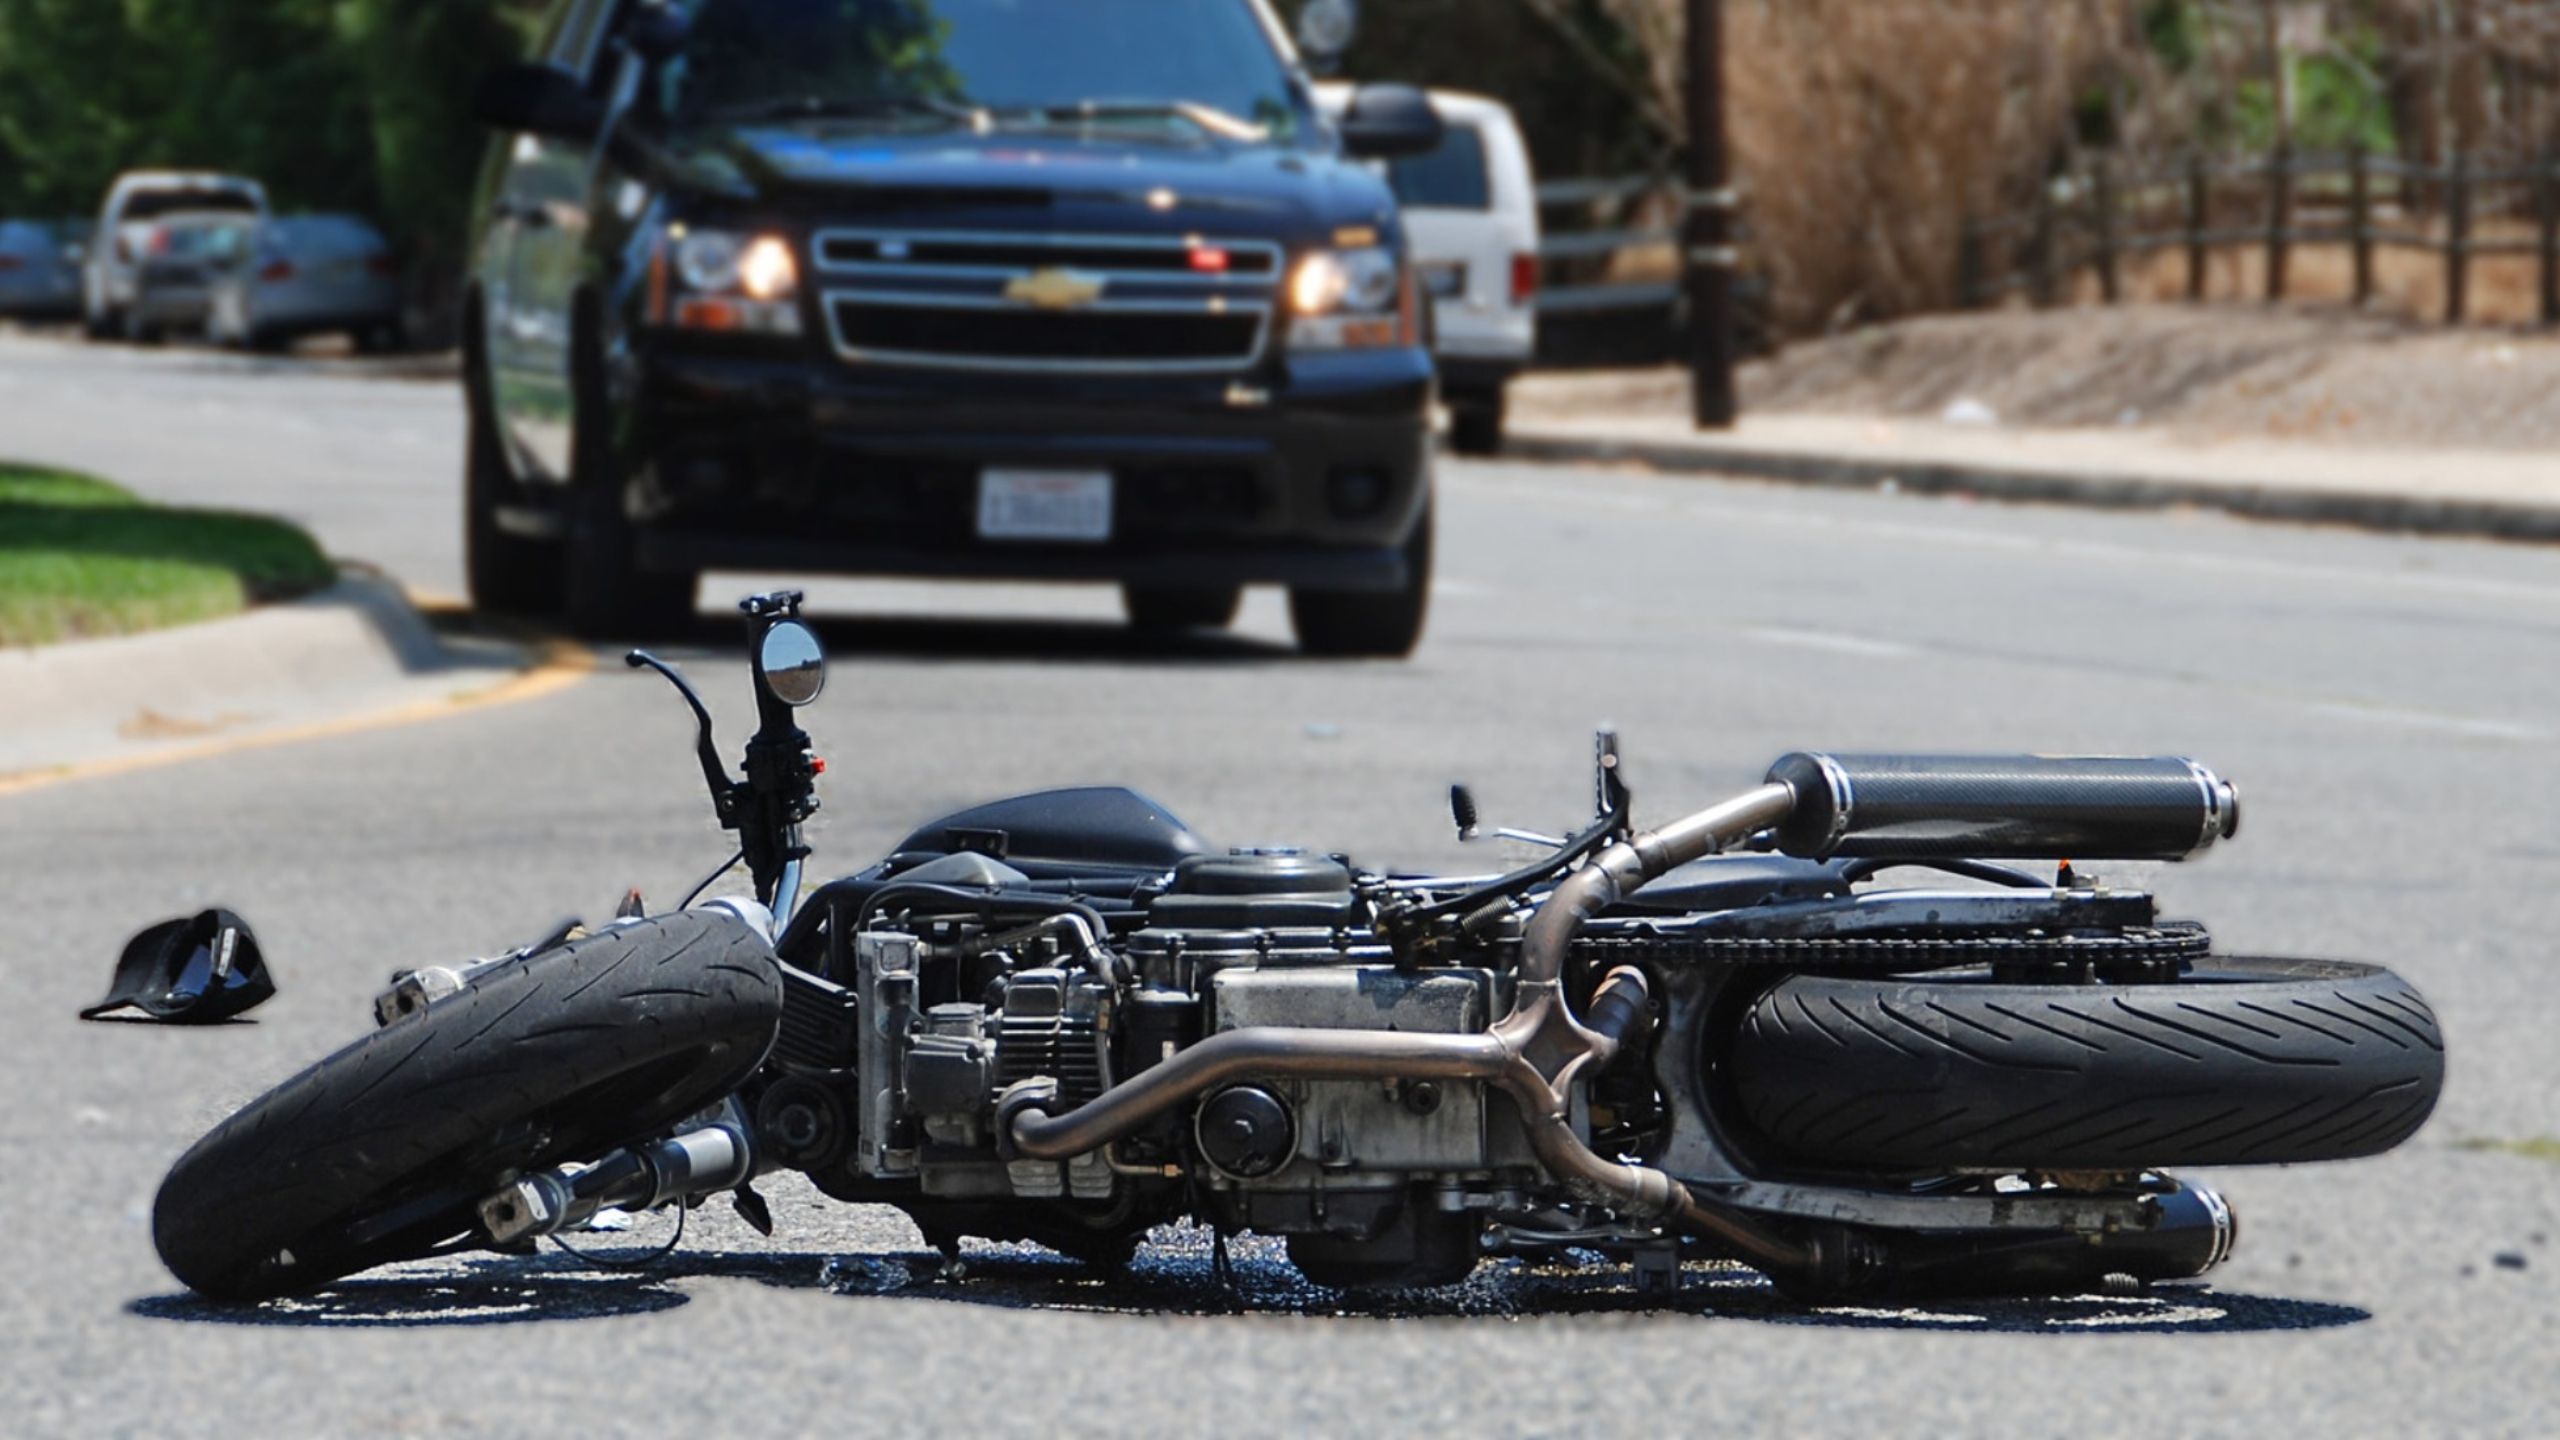 Crashed Motorcycle accident on the road